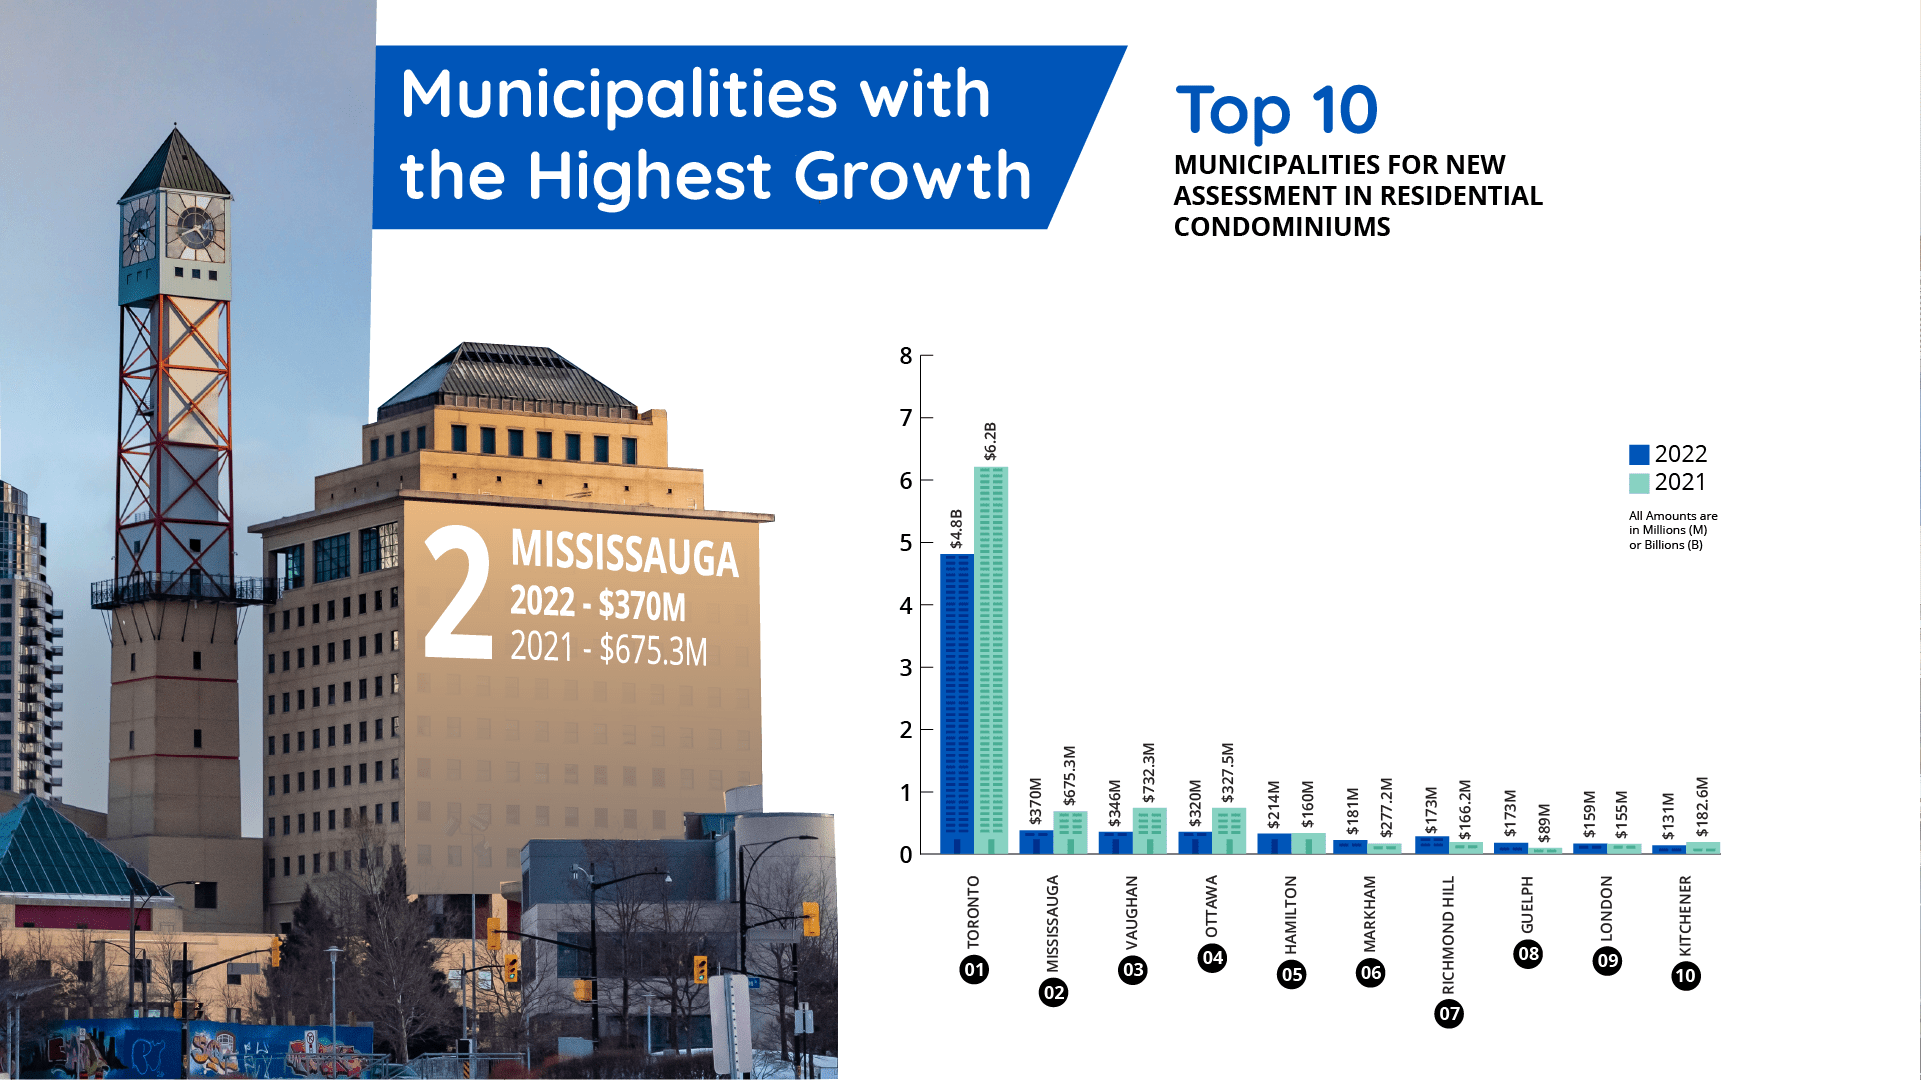 Visual of the top 10 municipalities for new assessment in residential condominiums